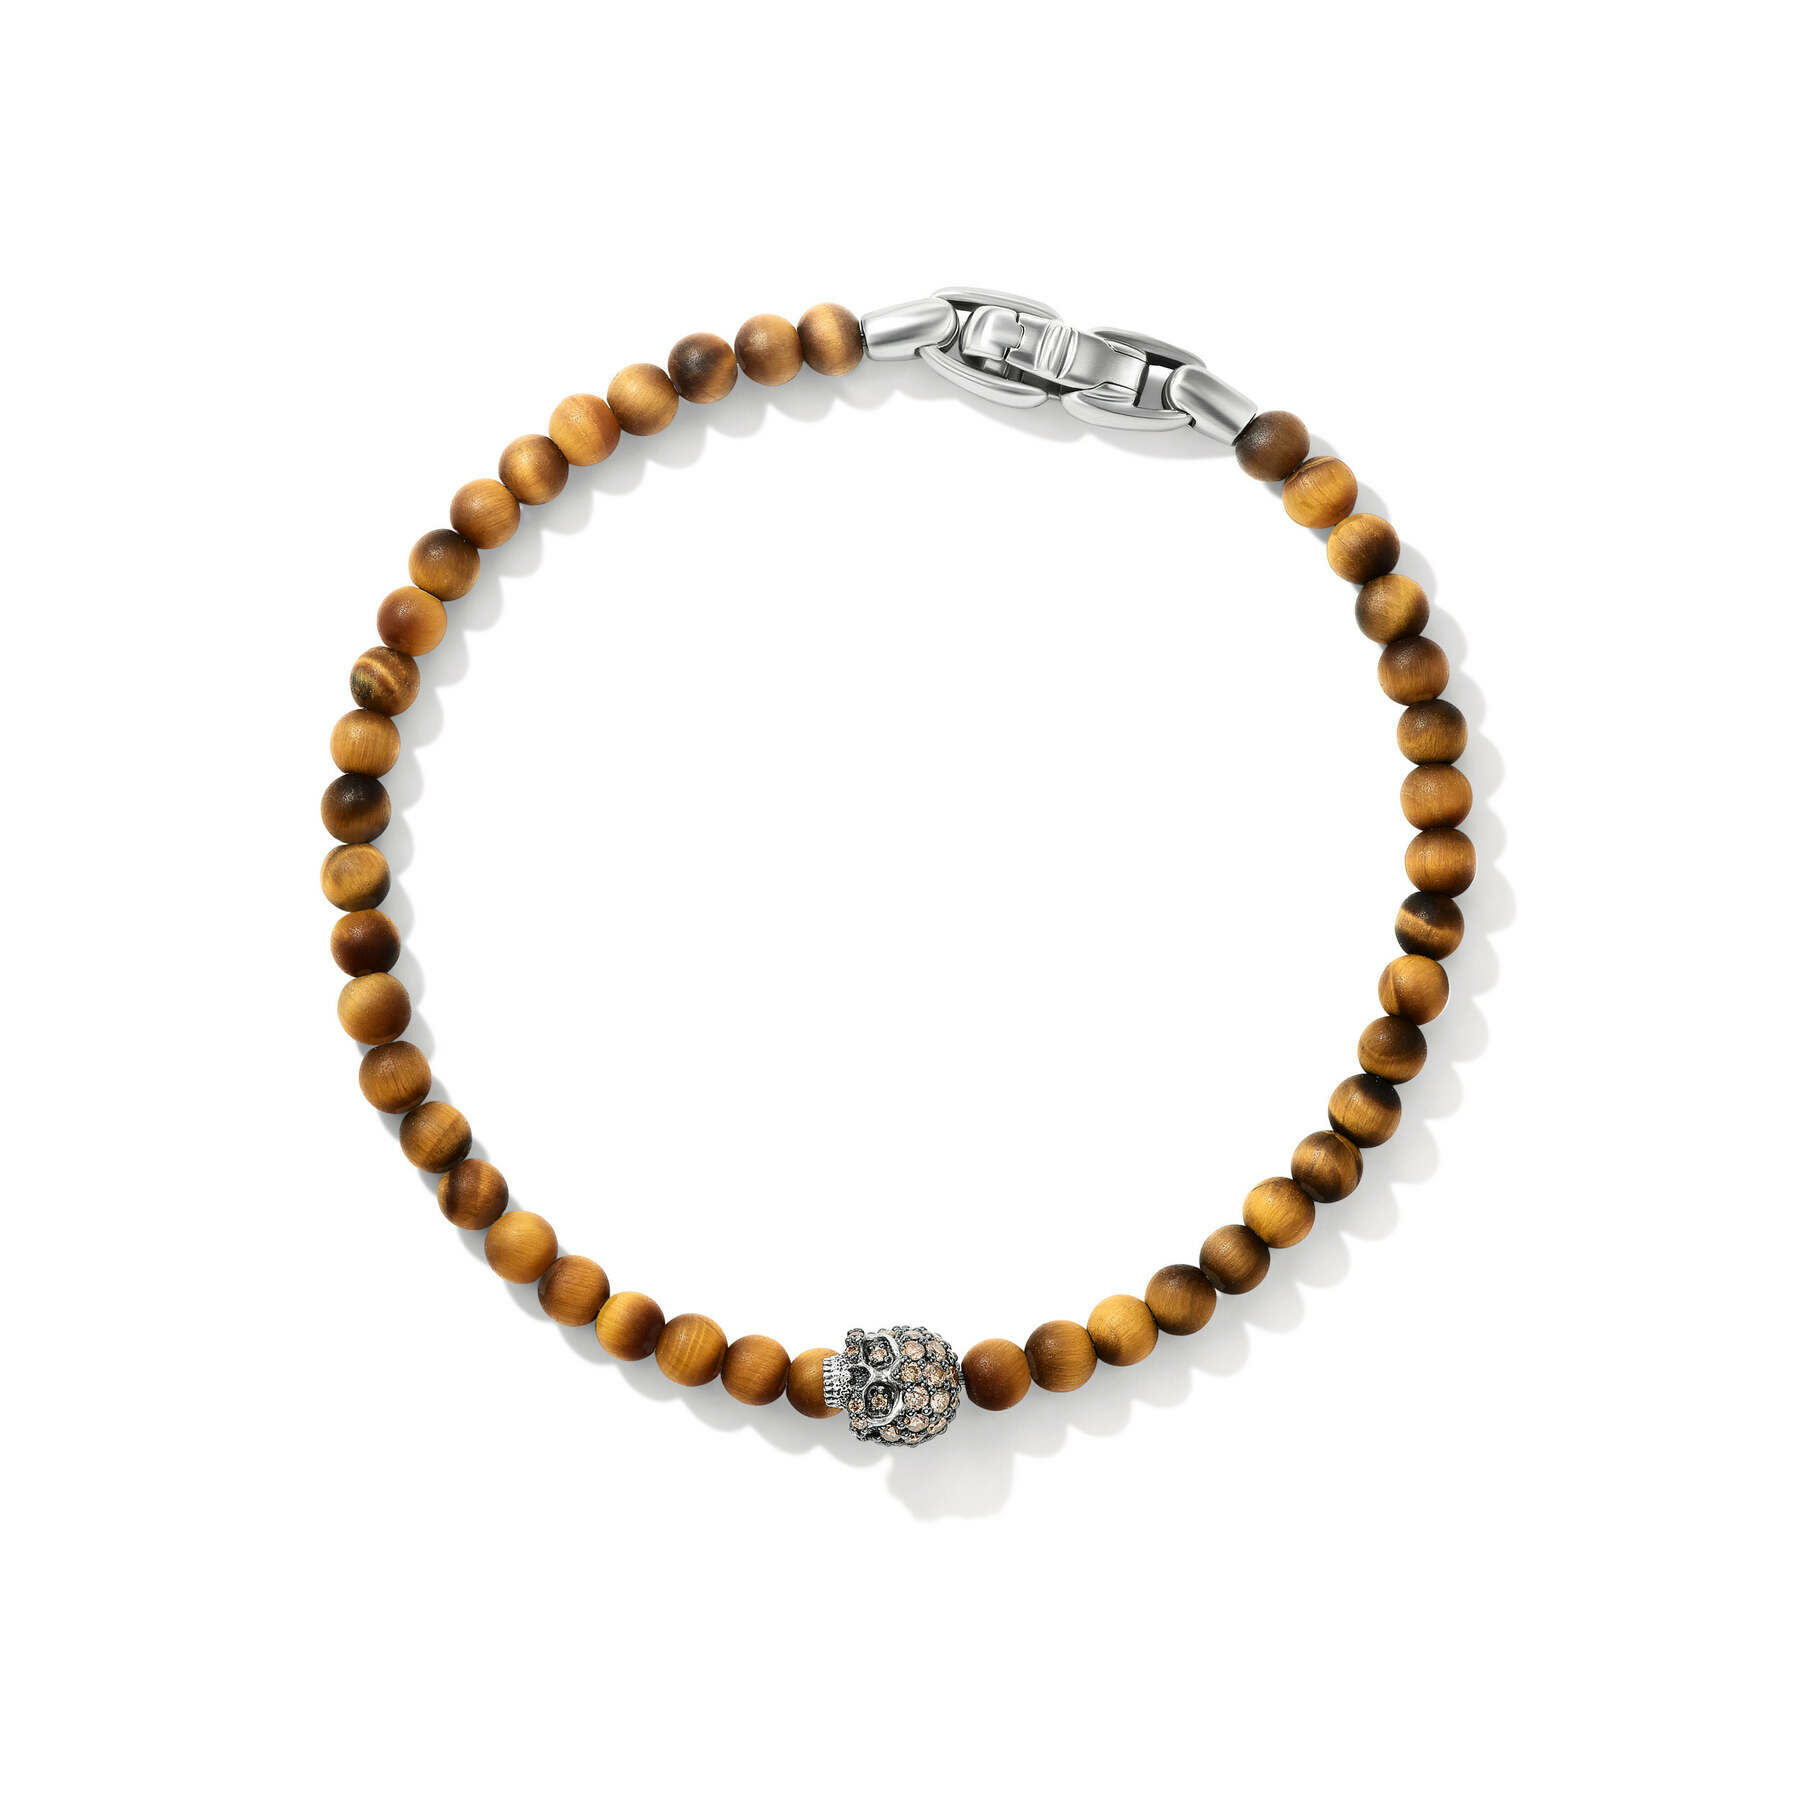 Memento Mori Skull Station Bracelet in Sterling Silver with Tigers Eye and Cognac Diamonds, 4mm